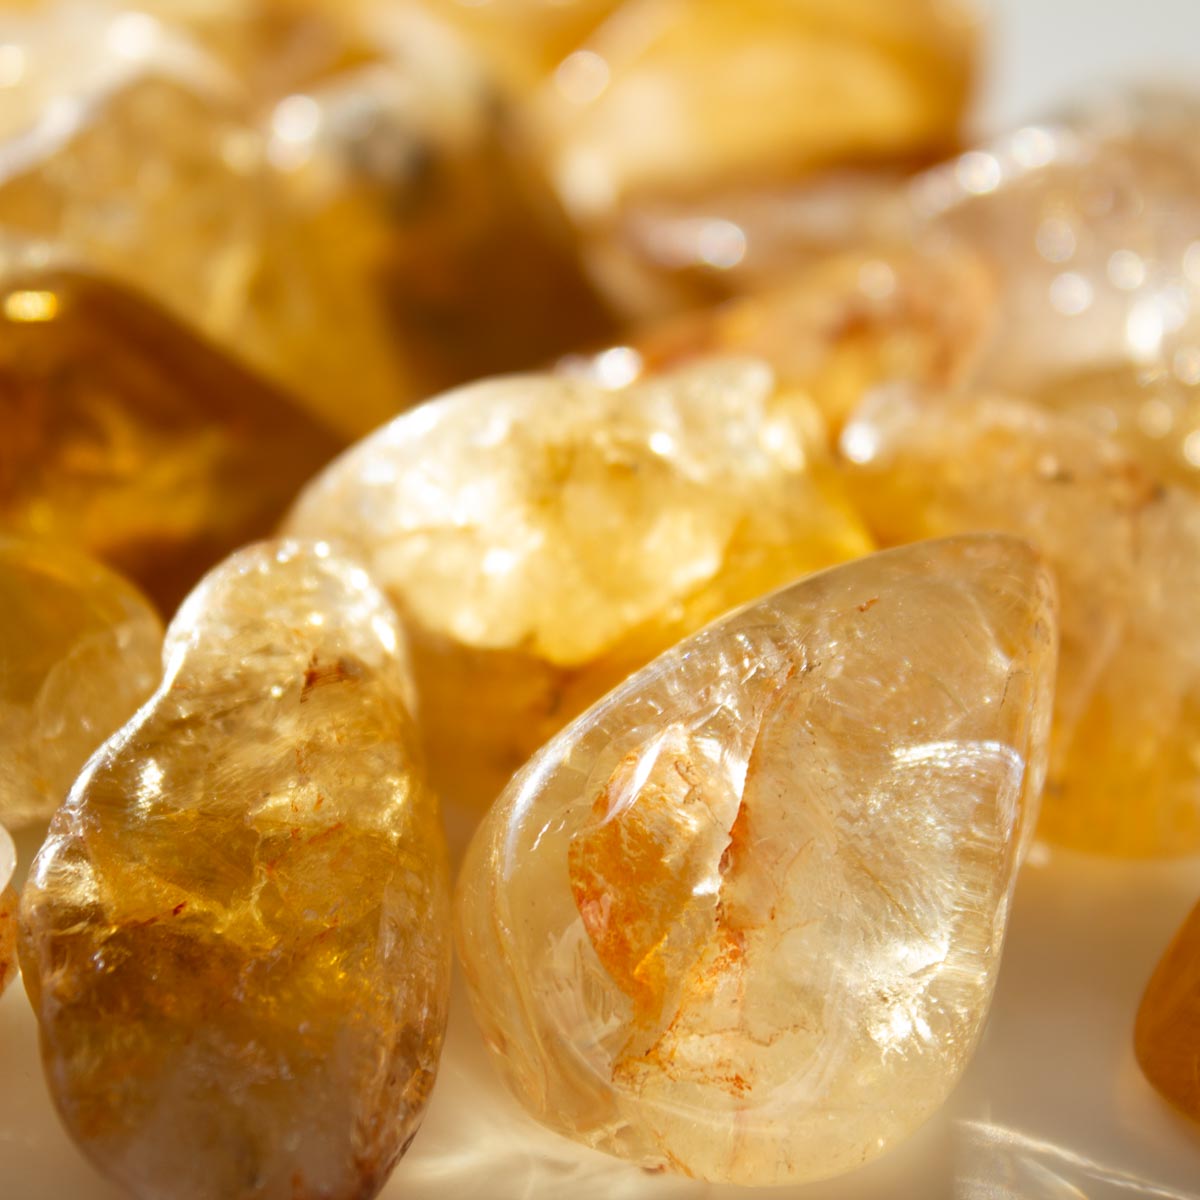 Ethical Citrine Healing Crystal for Cleansing, Warmth, and Energy